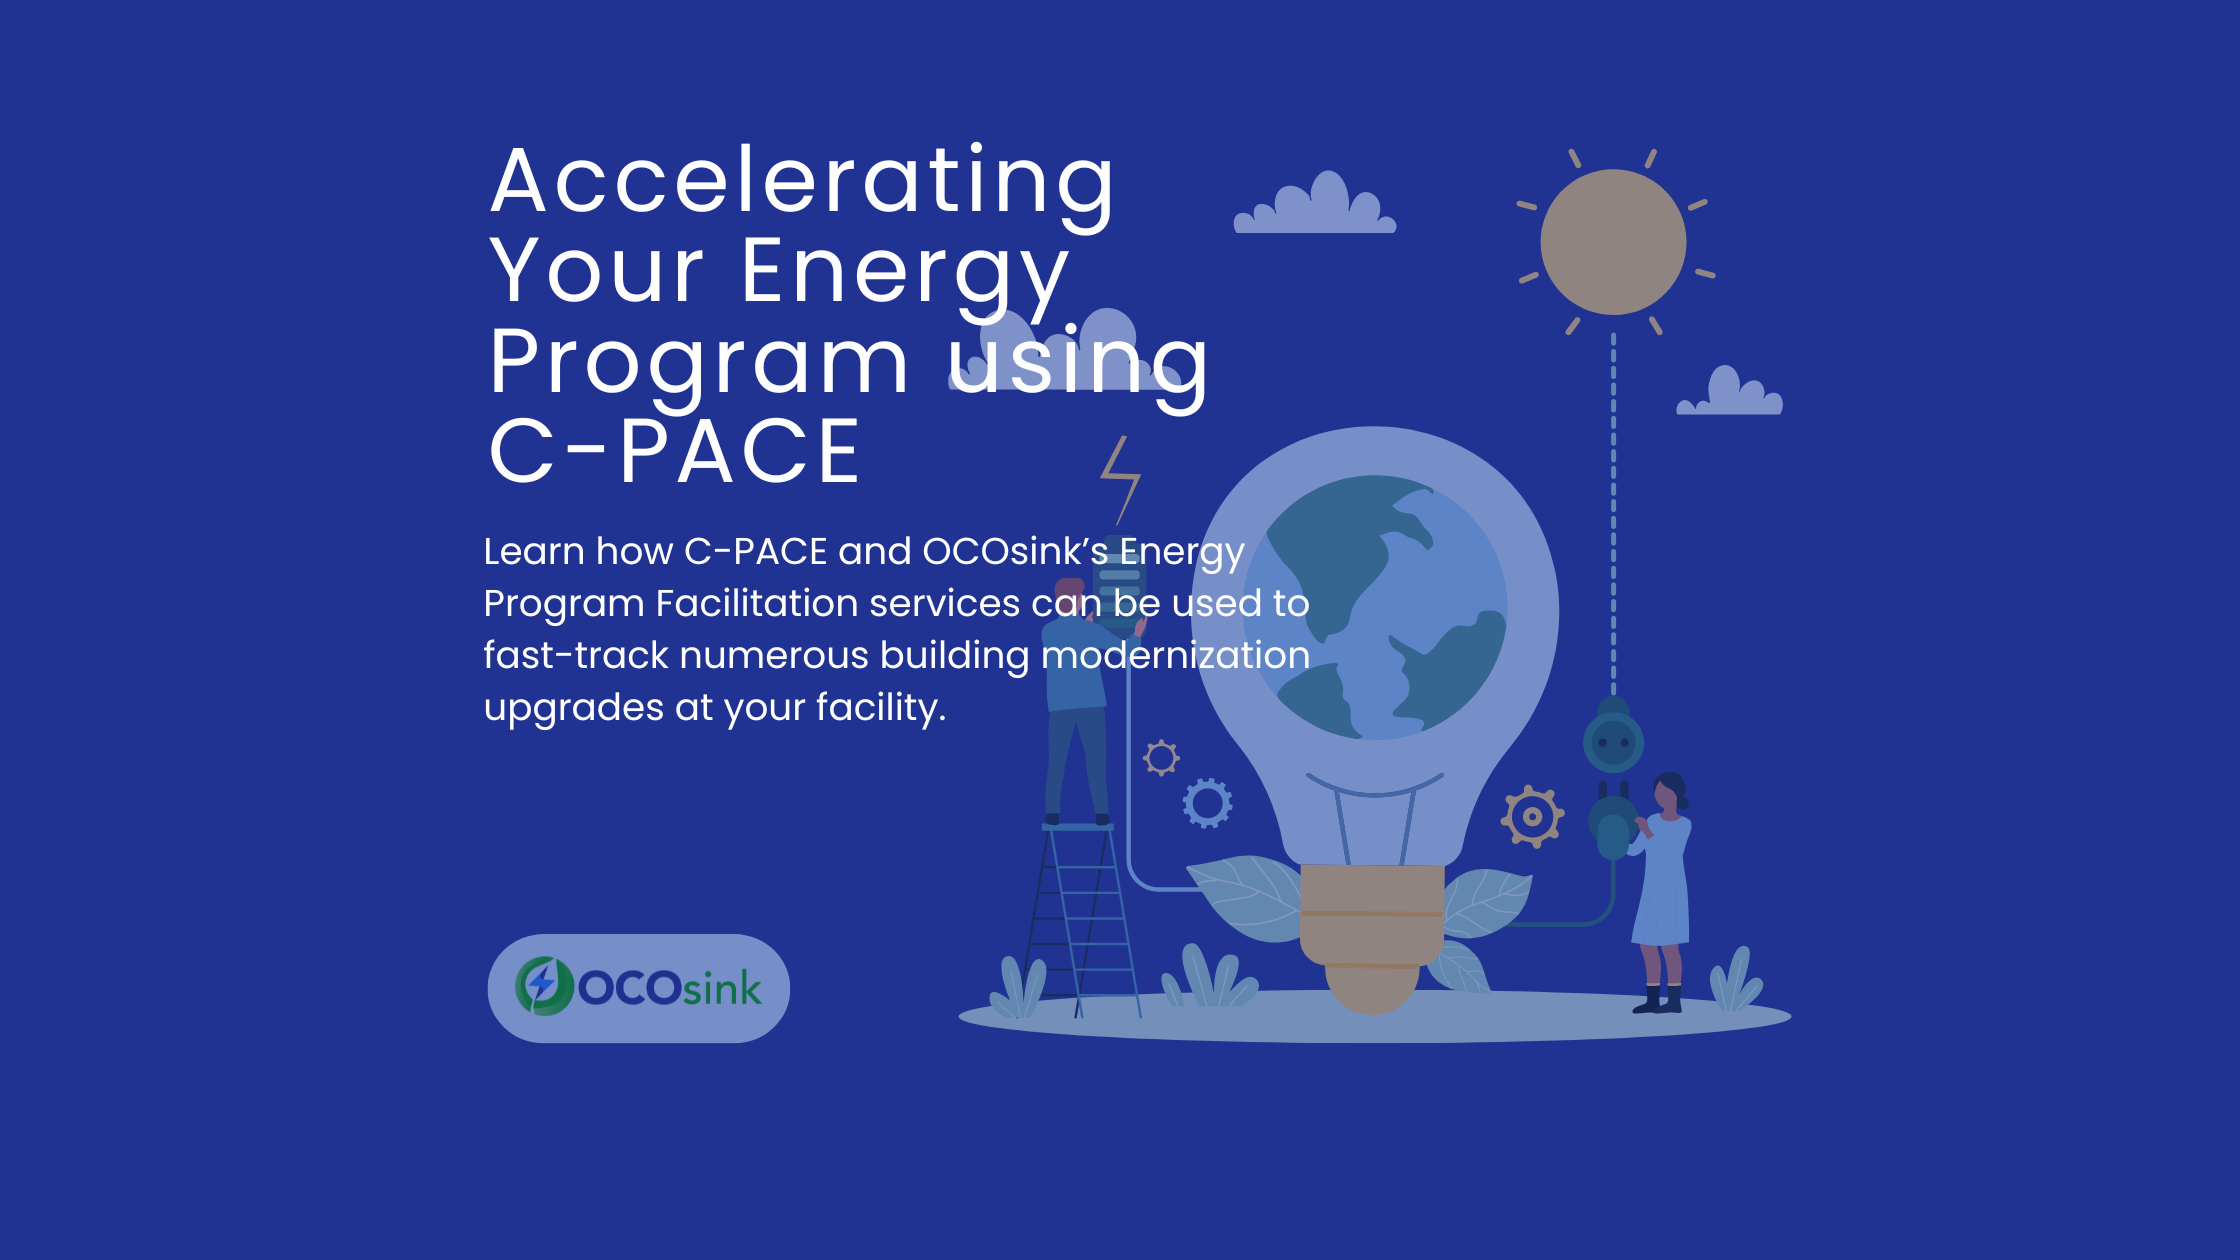 Accelerating Your Energy Program using C-PACE